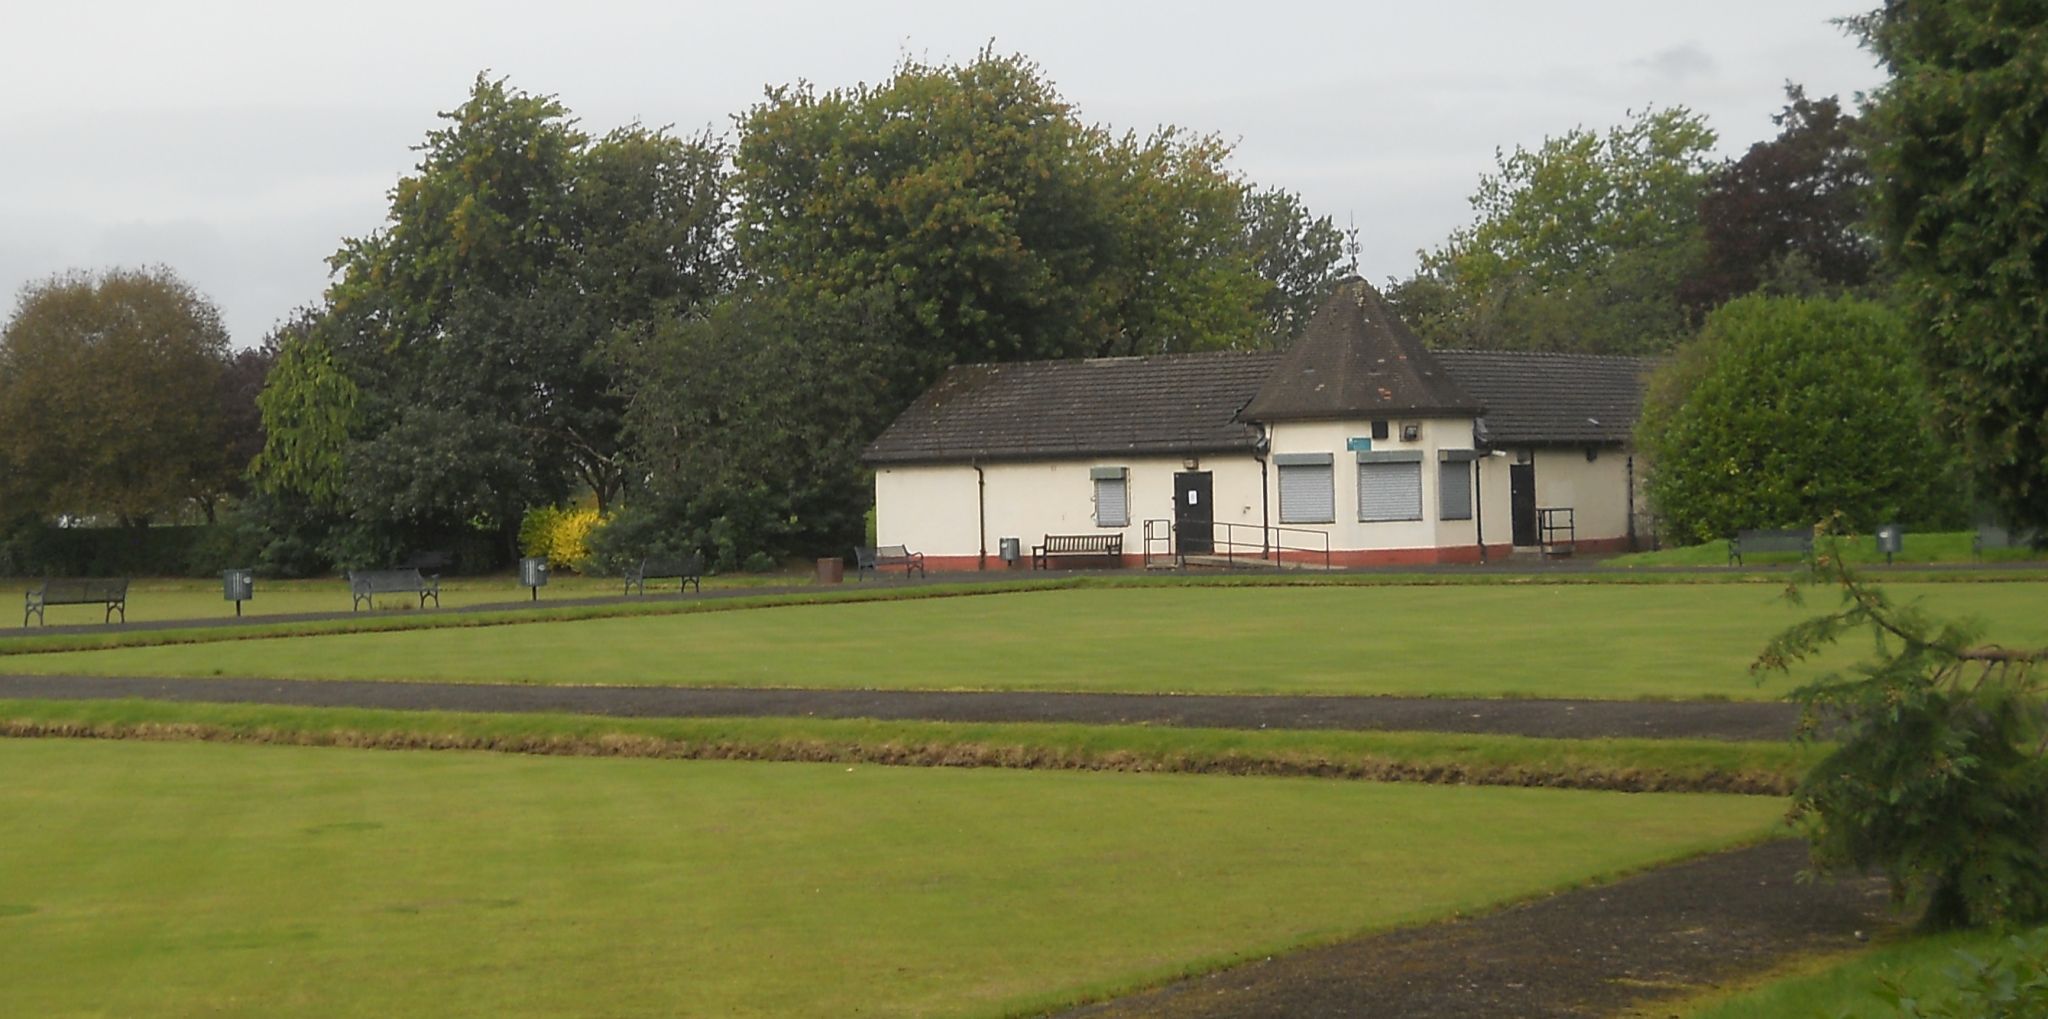 Bowling Greens and the Pavilion in Knightswood Park ( b1947 )